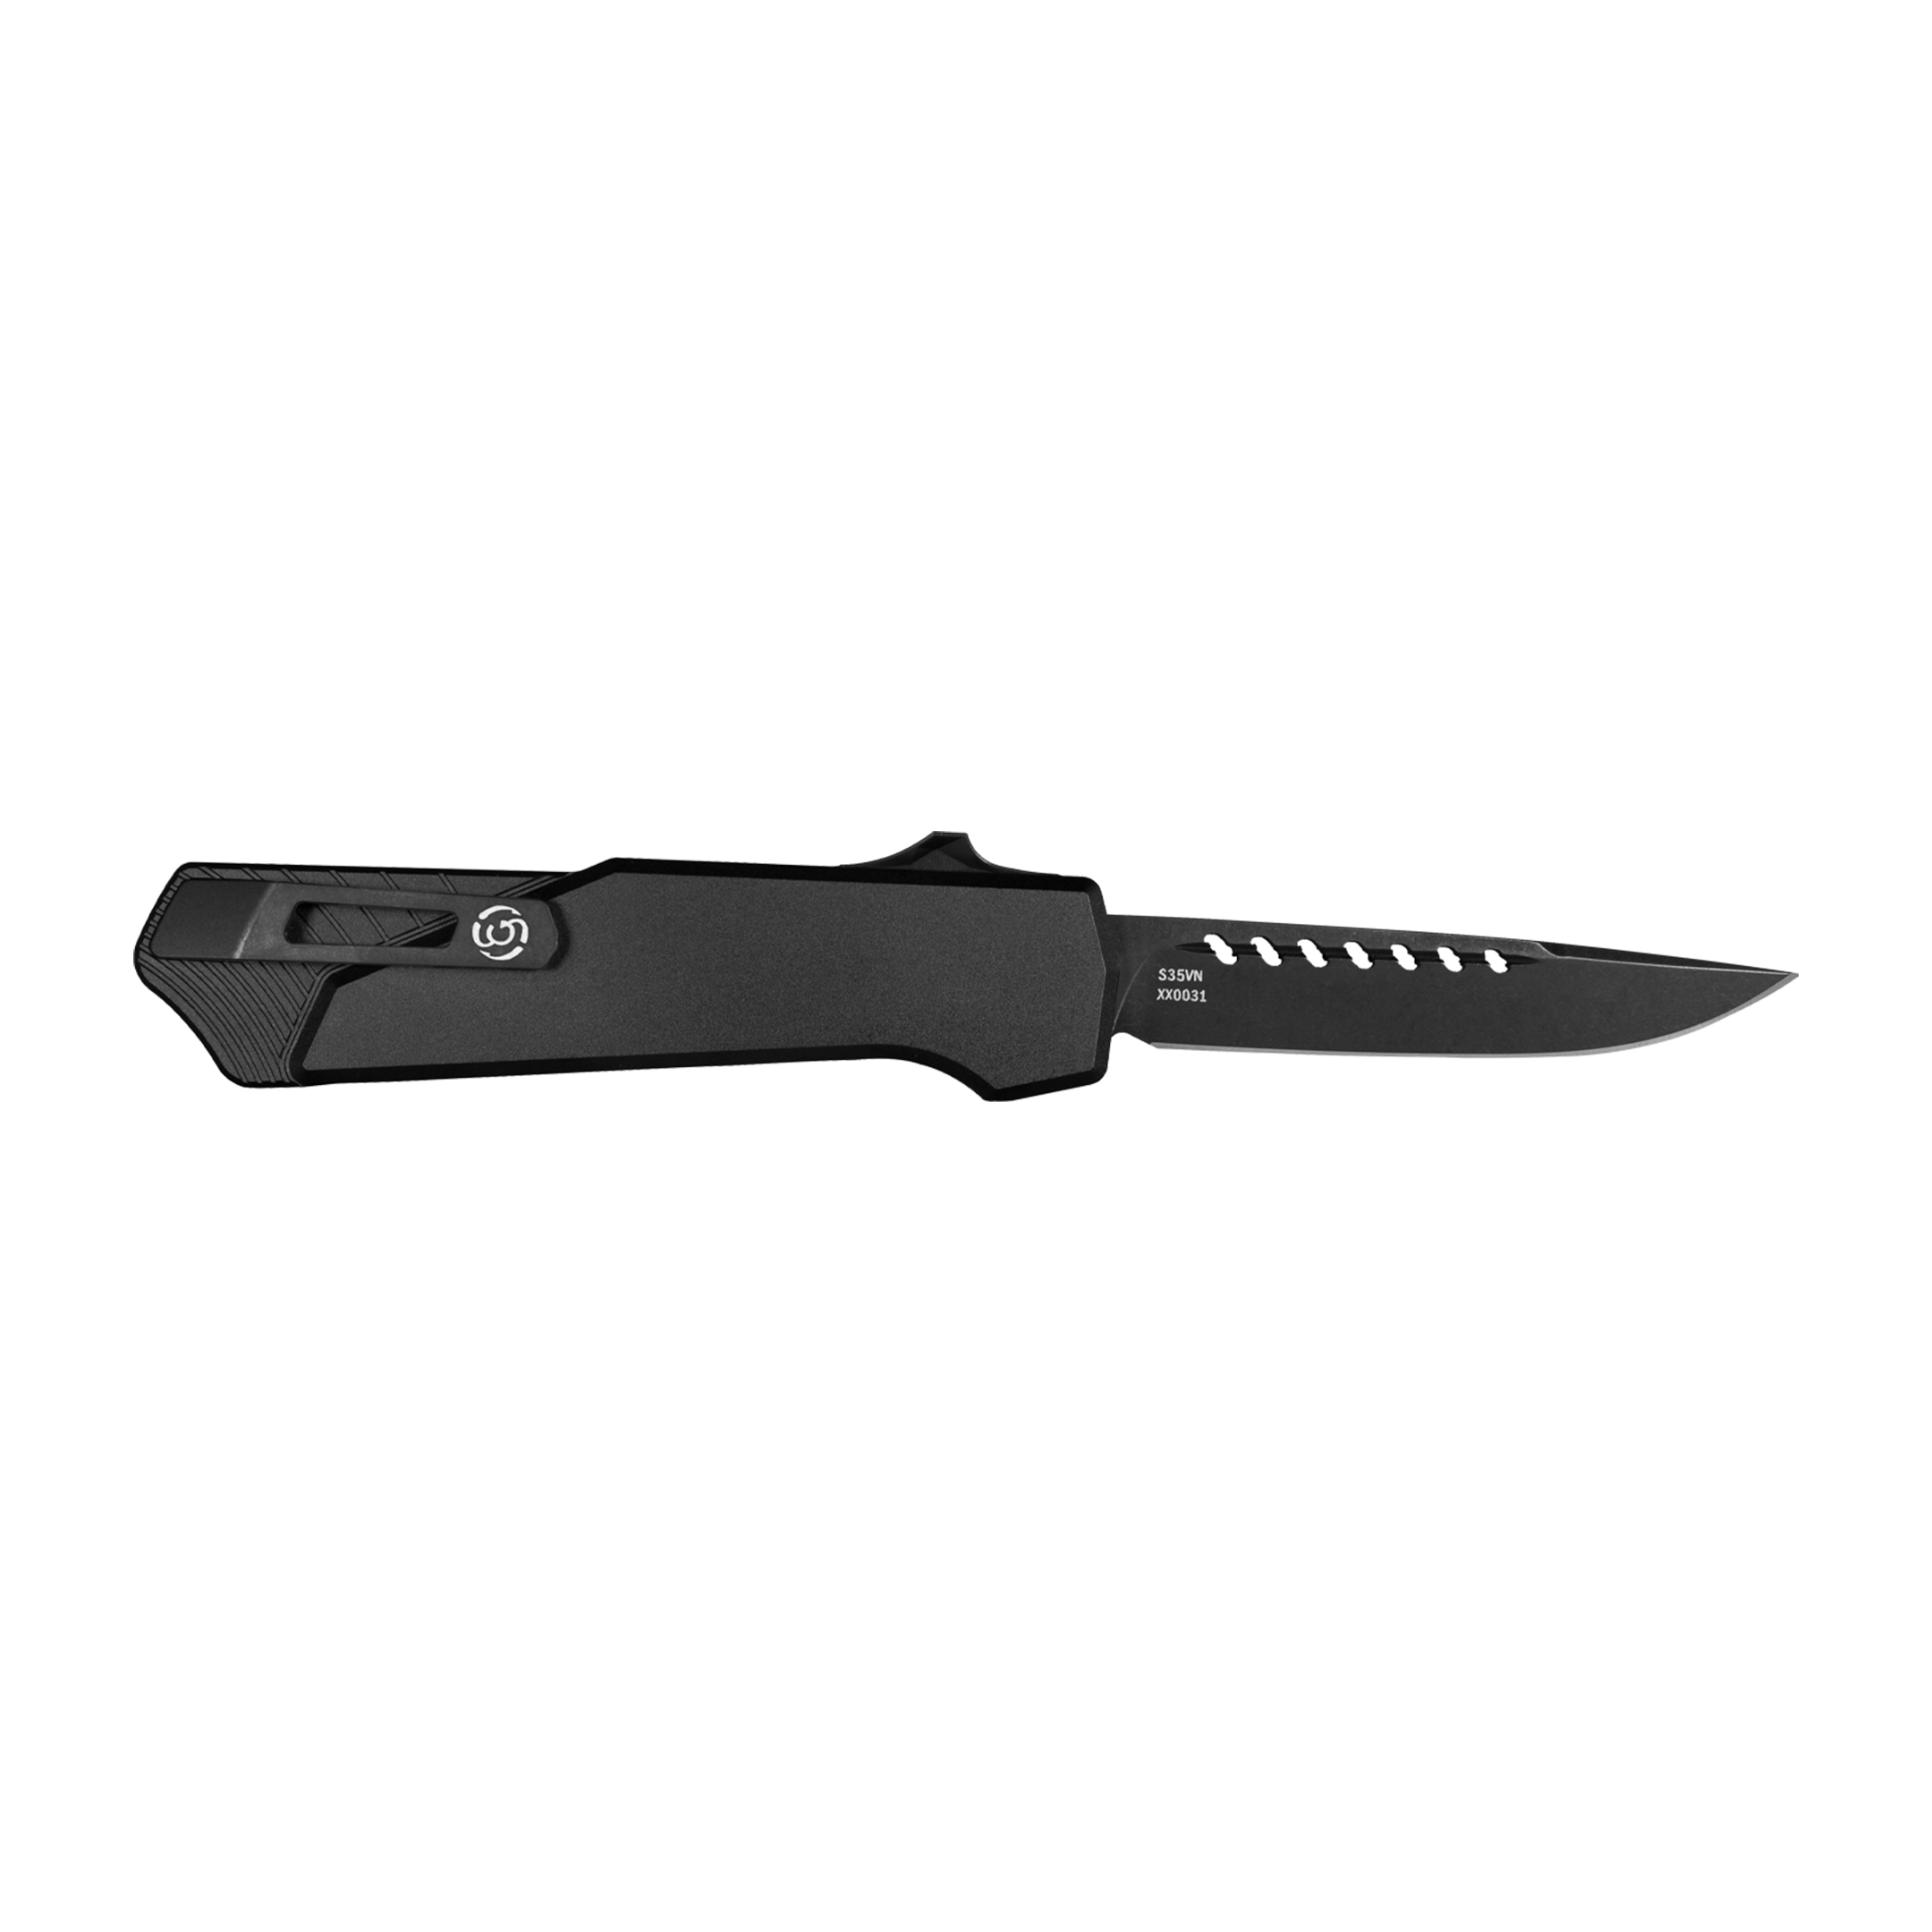 HOLD OUT 3 BLADE FULL SERRATED EDGE BLK S35VN